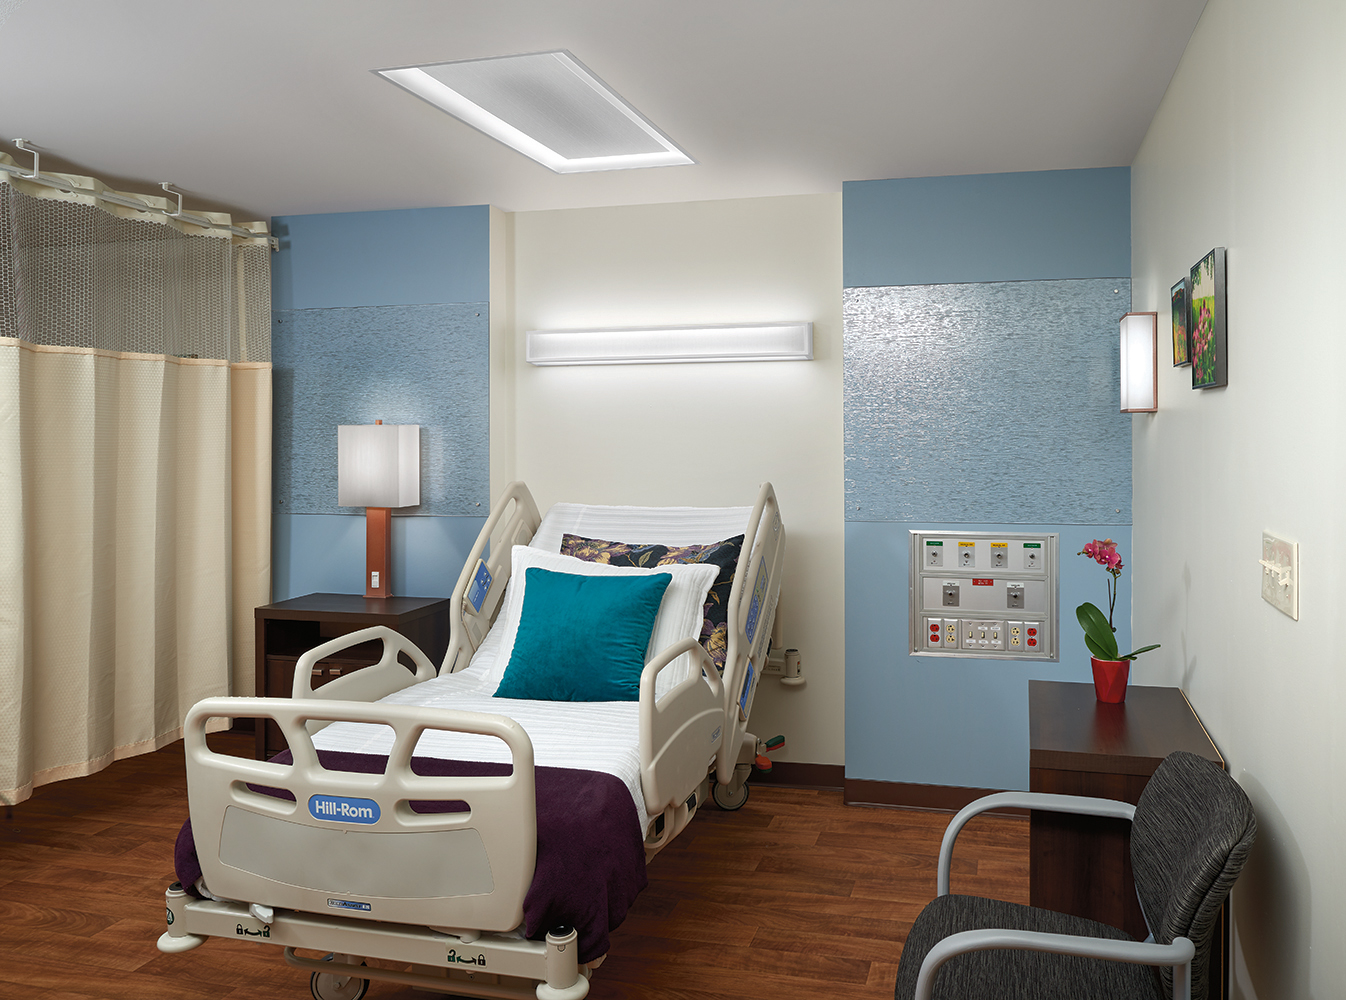 Serenity emits comforting overbed light and a matching table lamp for modern patient room lighting design.